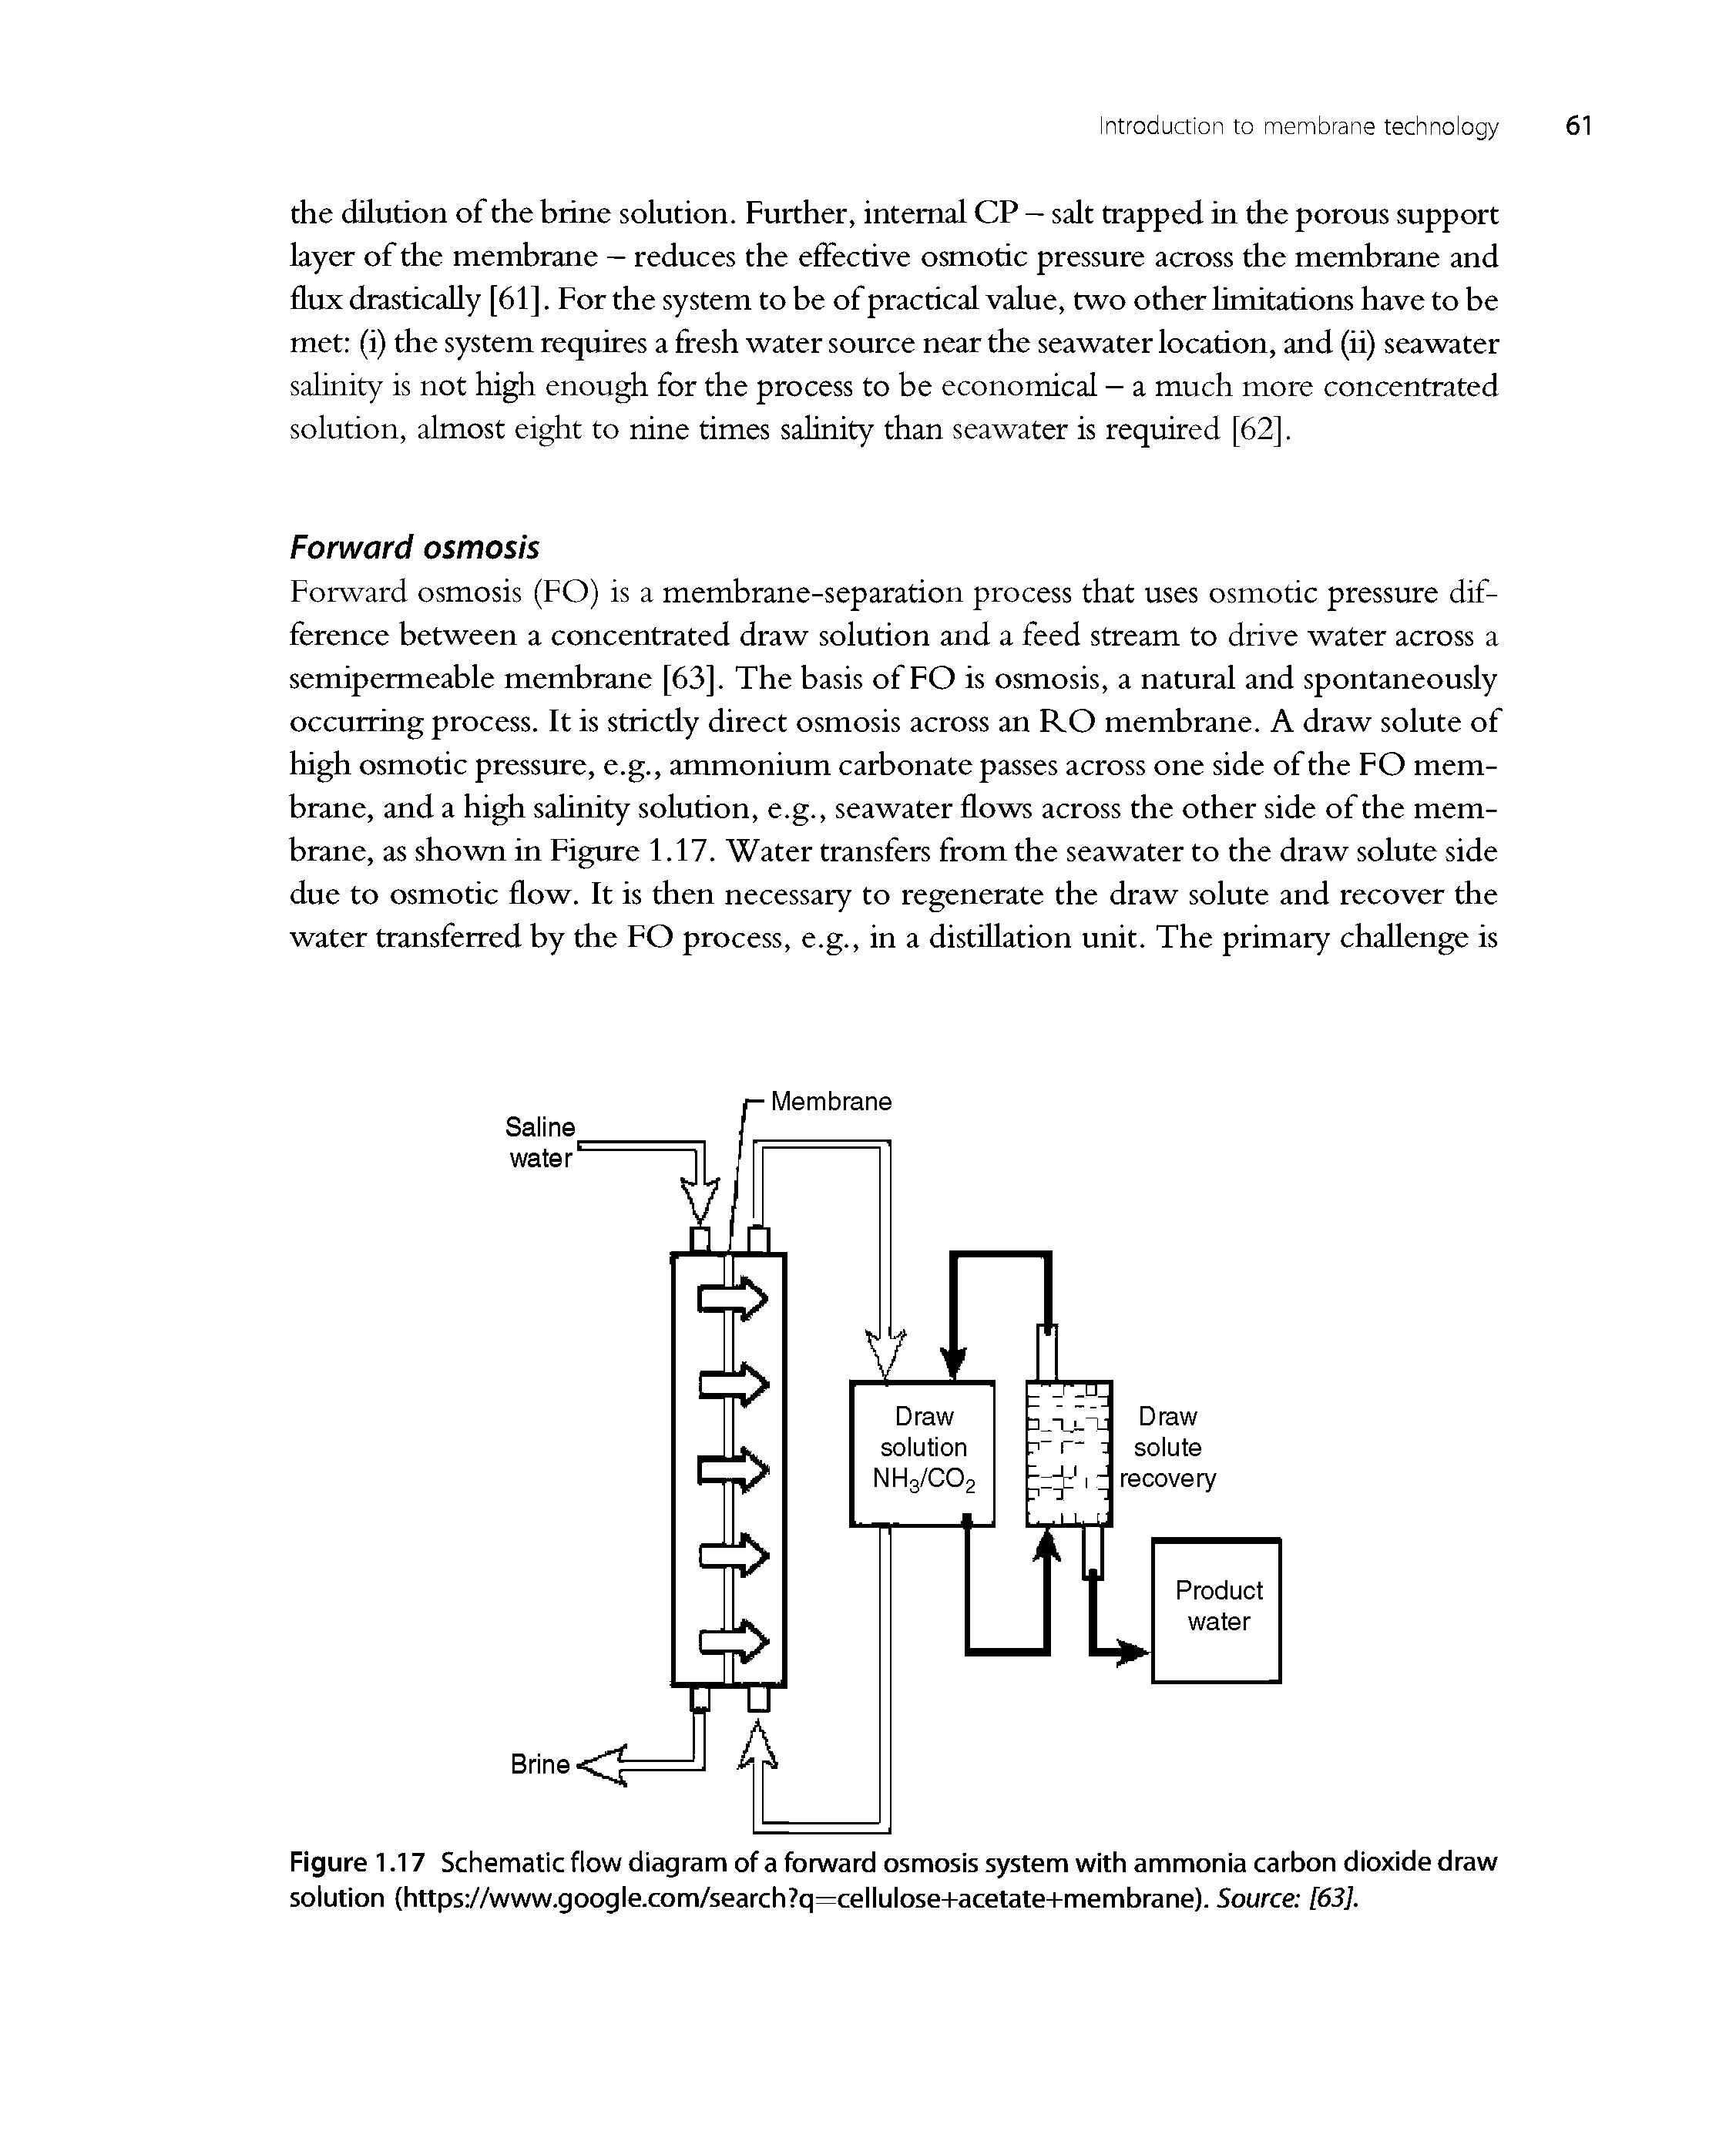 Figure 1.17 Schematic flow diagram of a forward osmosis system with ammonia carbon dioxide draw solution (https //www.google.com/search q=cellulose+acetate+membrane). Source [63].